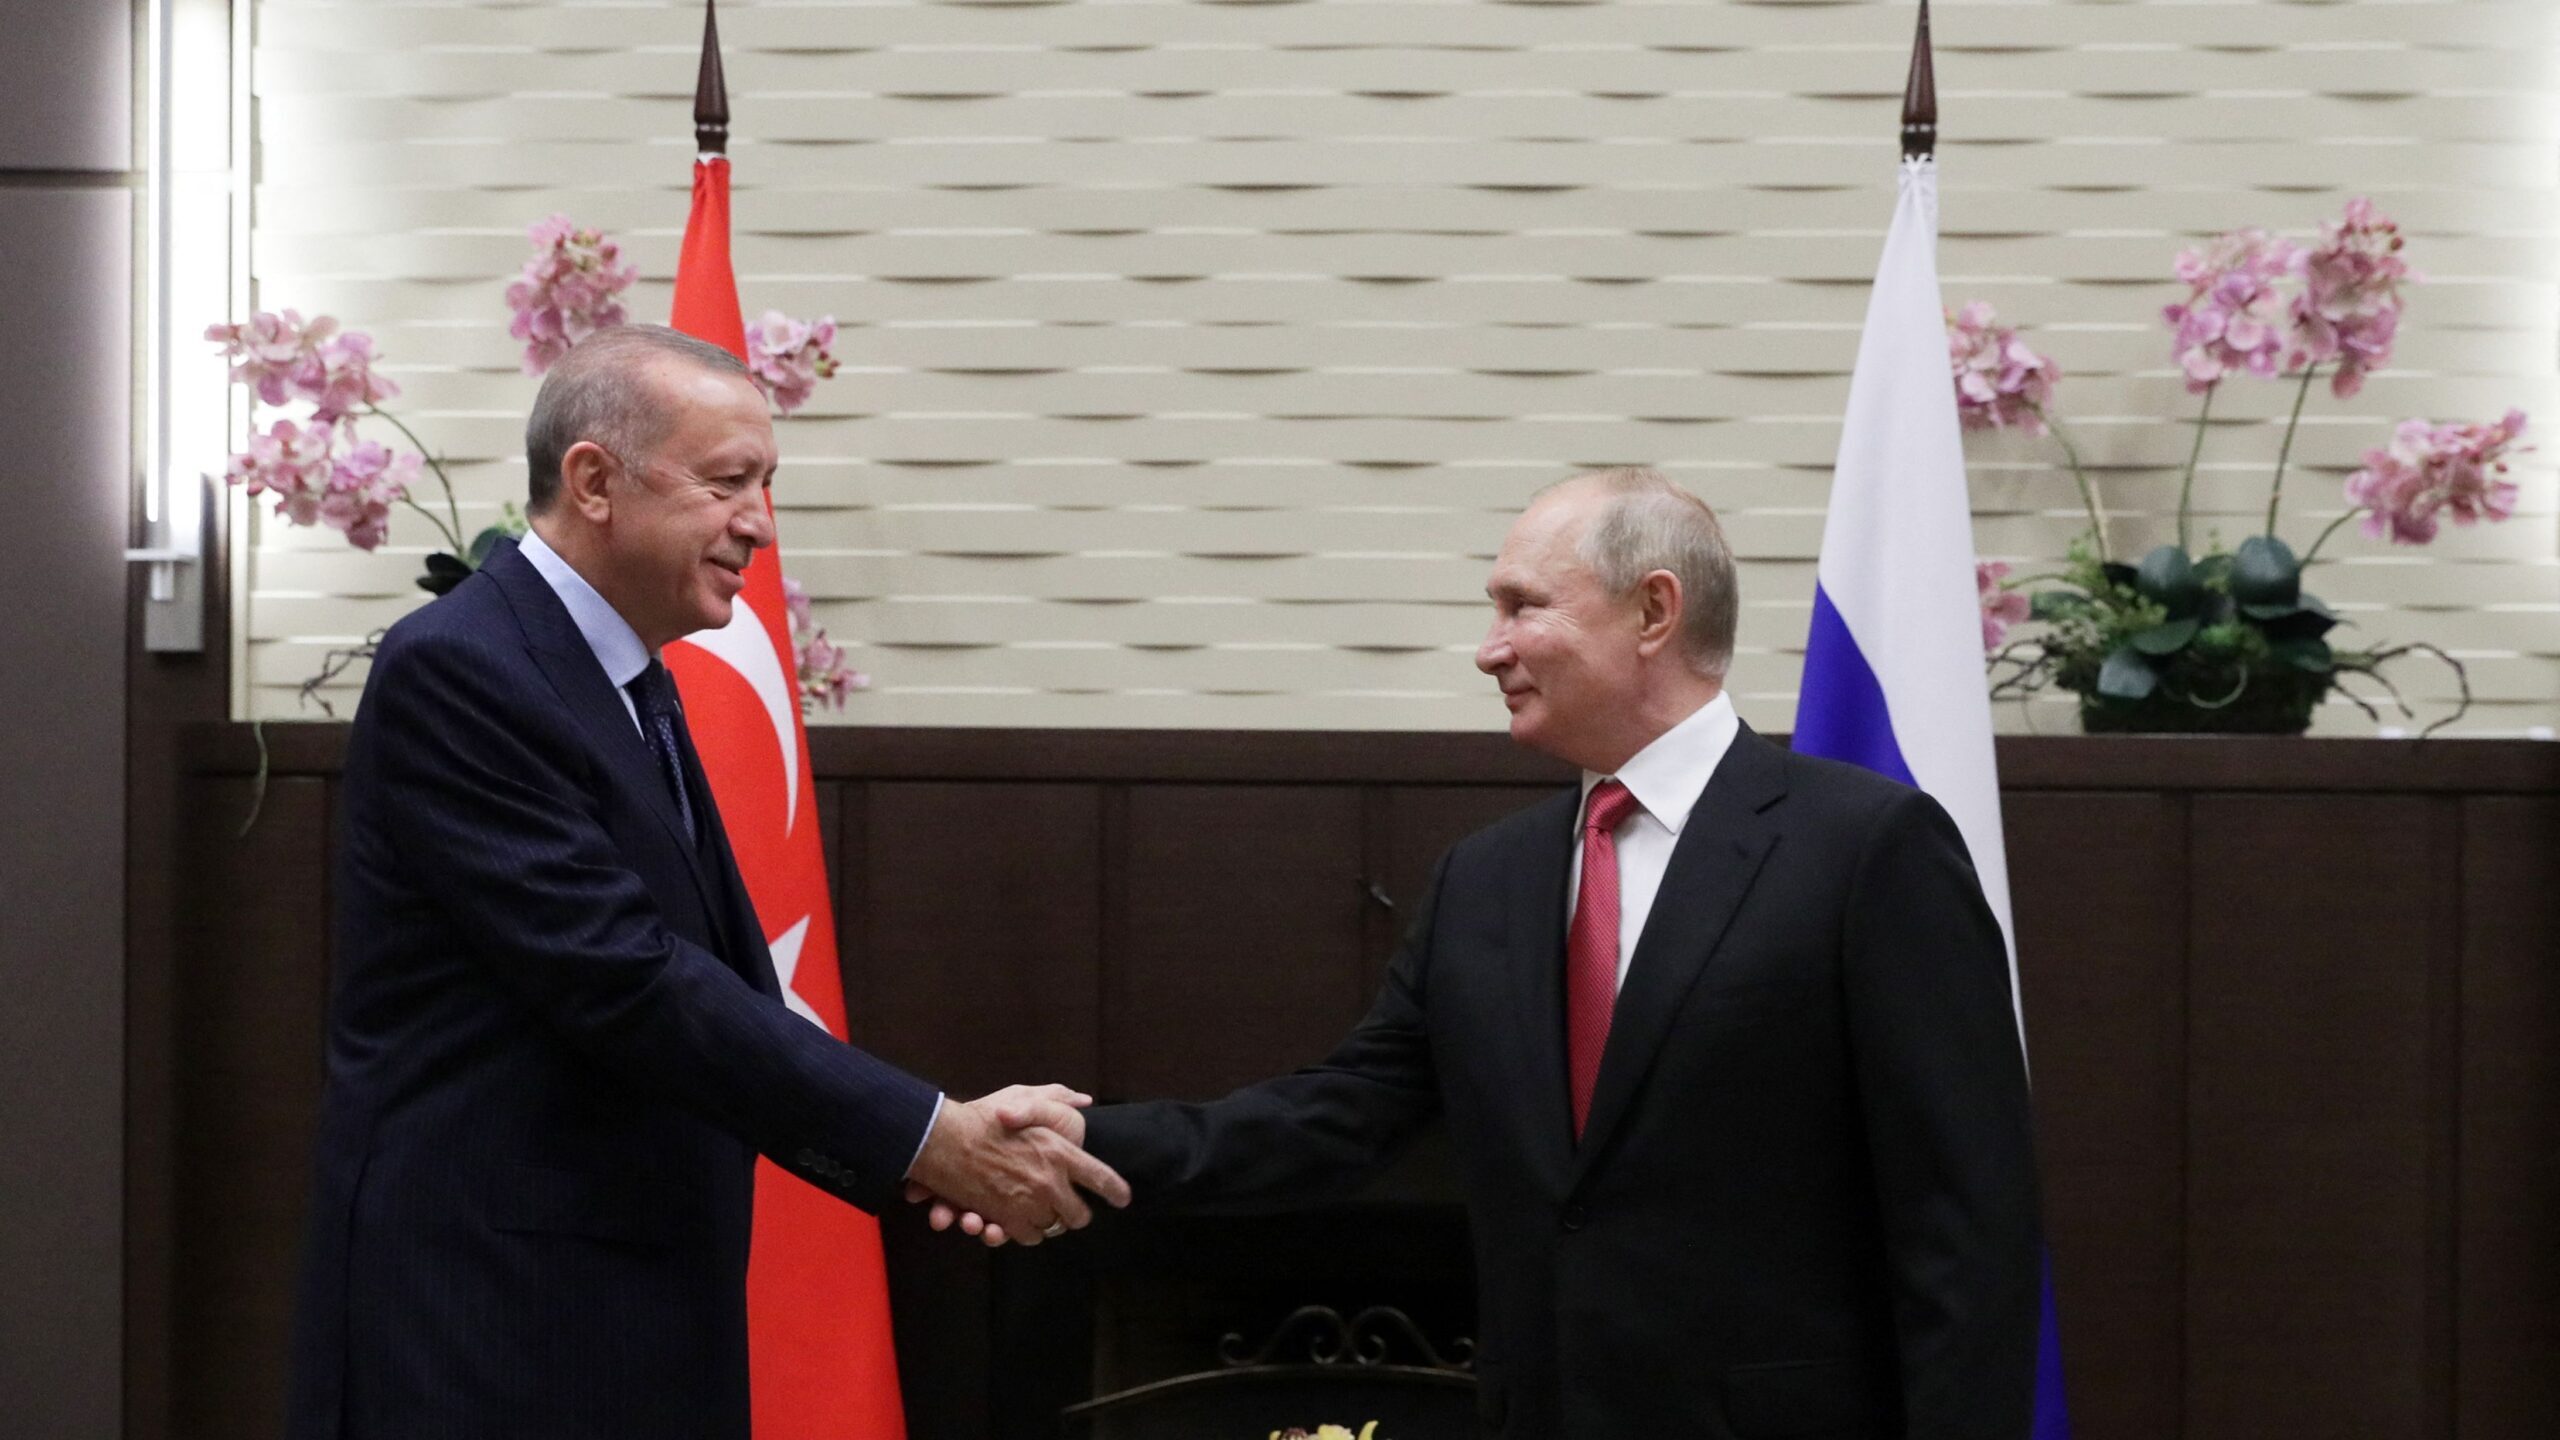 Turkey’s Fighter Flirtation With Russia: Is it Serious?